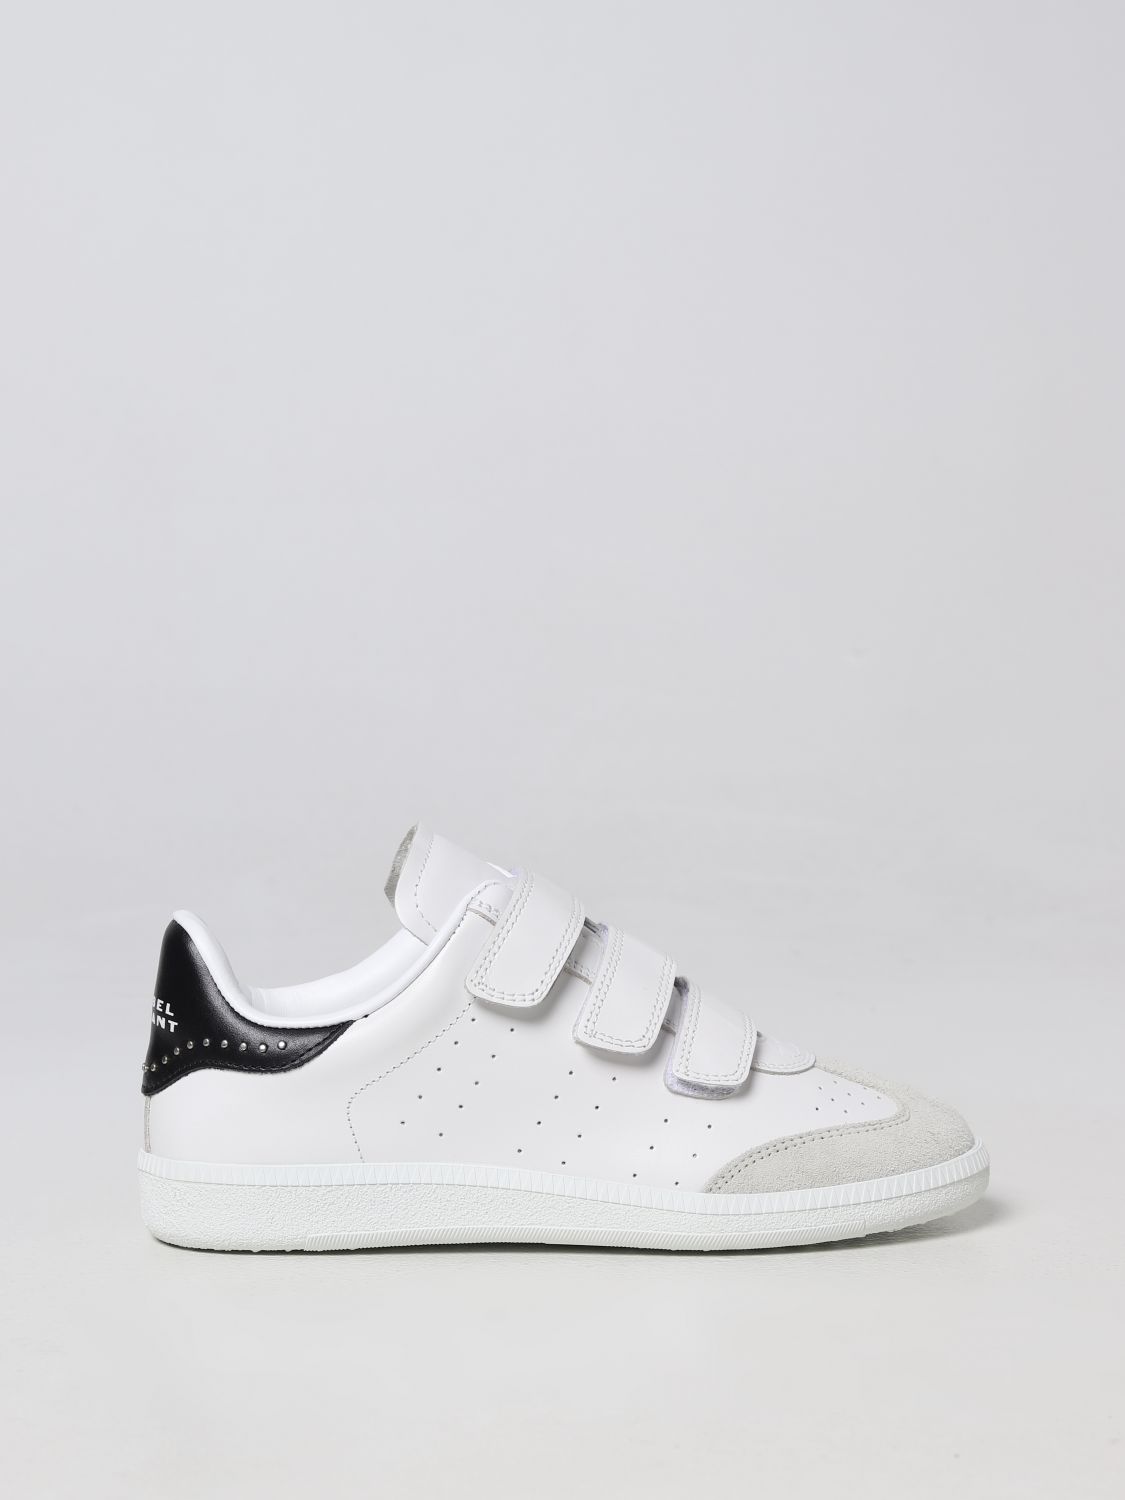 Modtagelig for komplikationer Republik sneakers for woman - Black | Isabel Marant sneakers BK0013FAA1E23S online  on GIGLIO.COM